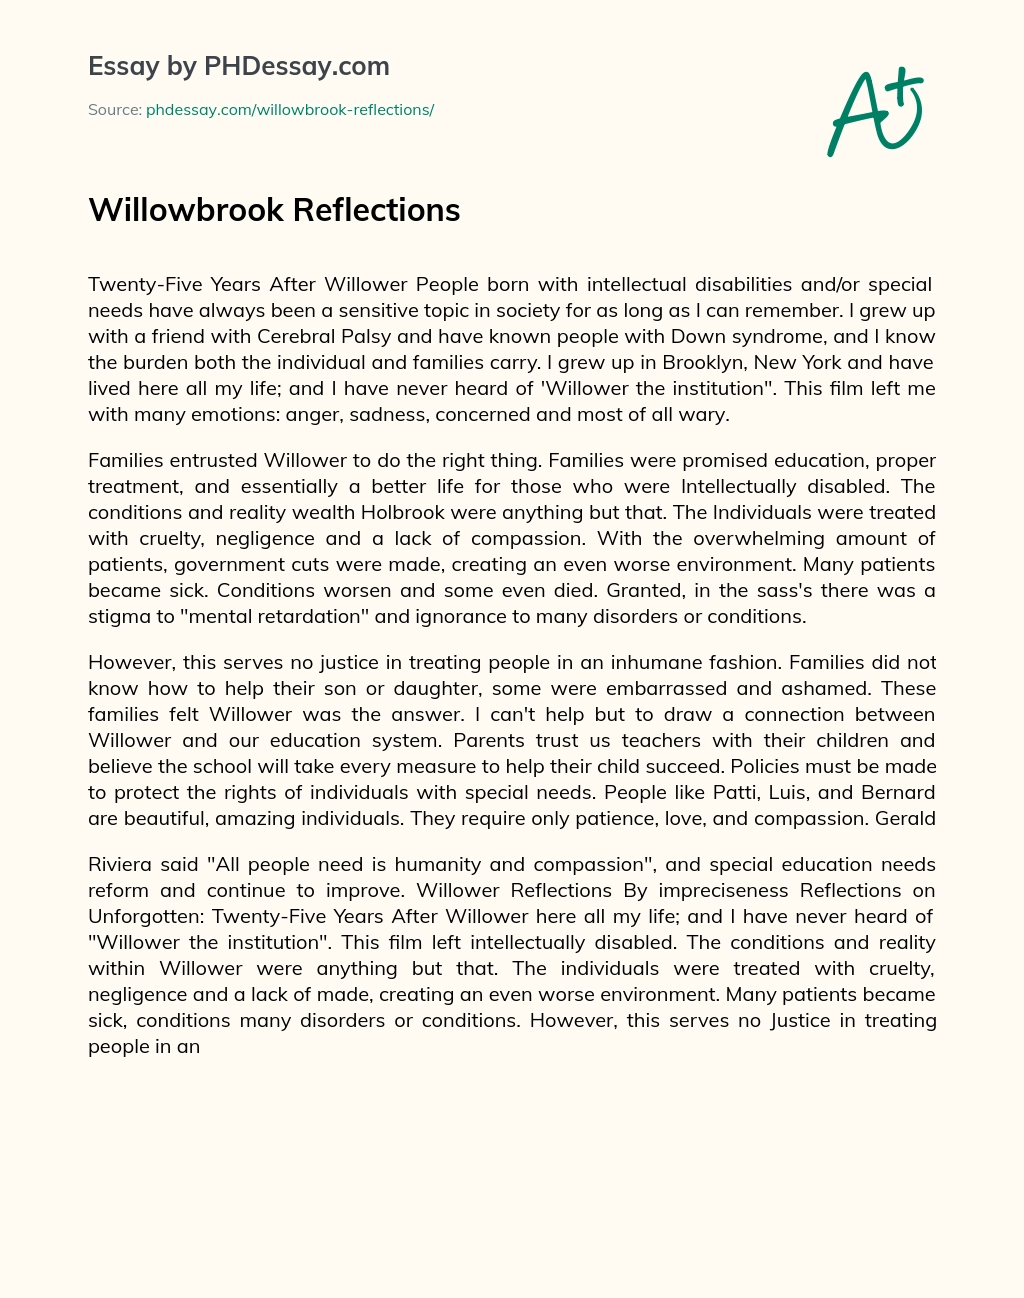 Willowbrook Reflections essay